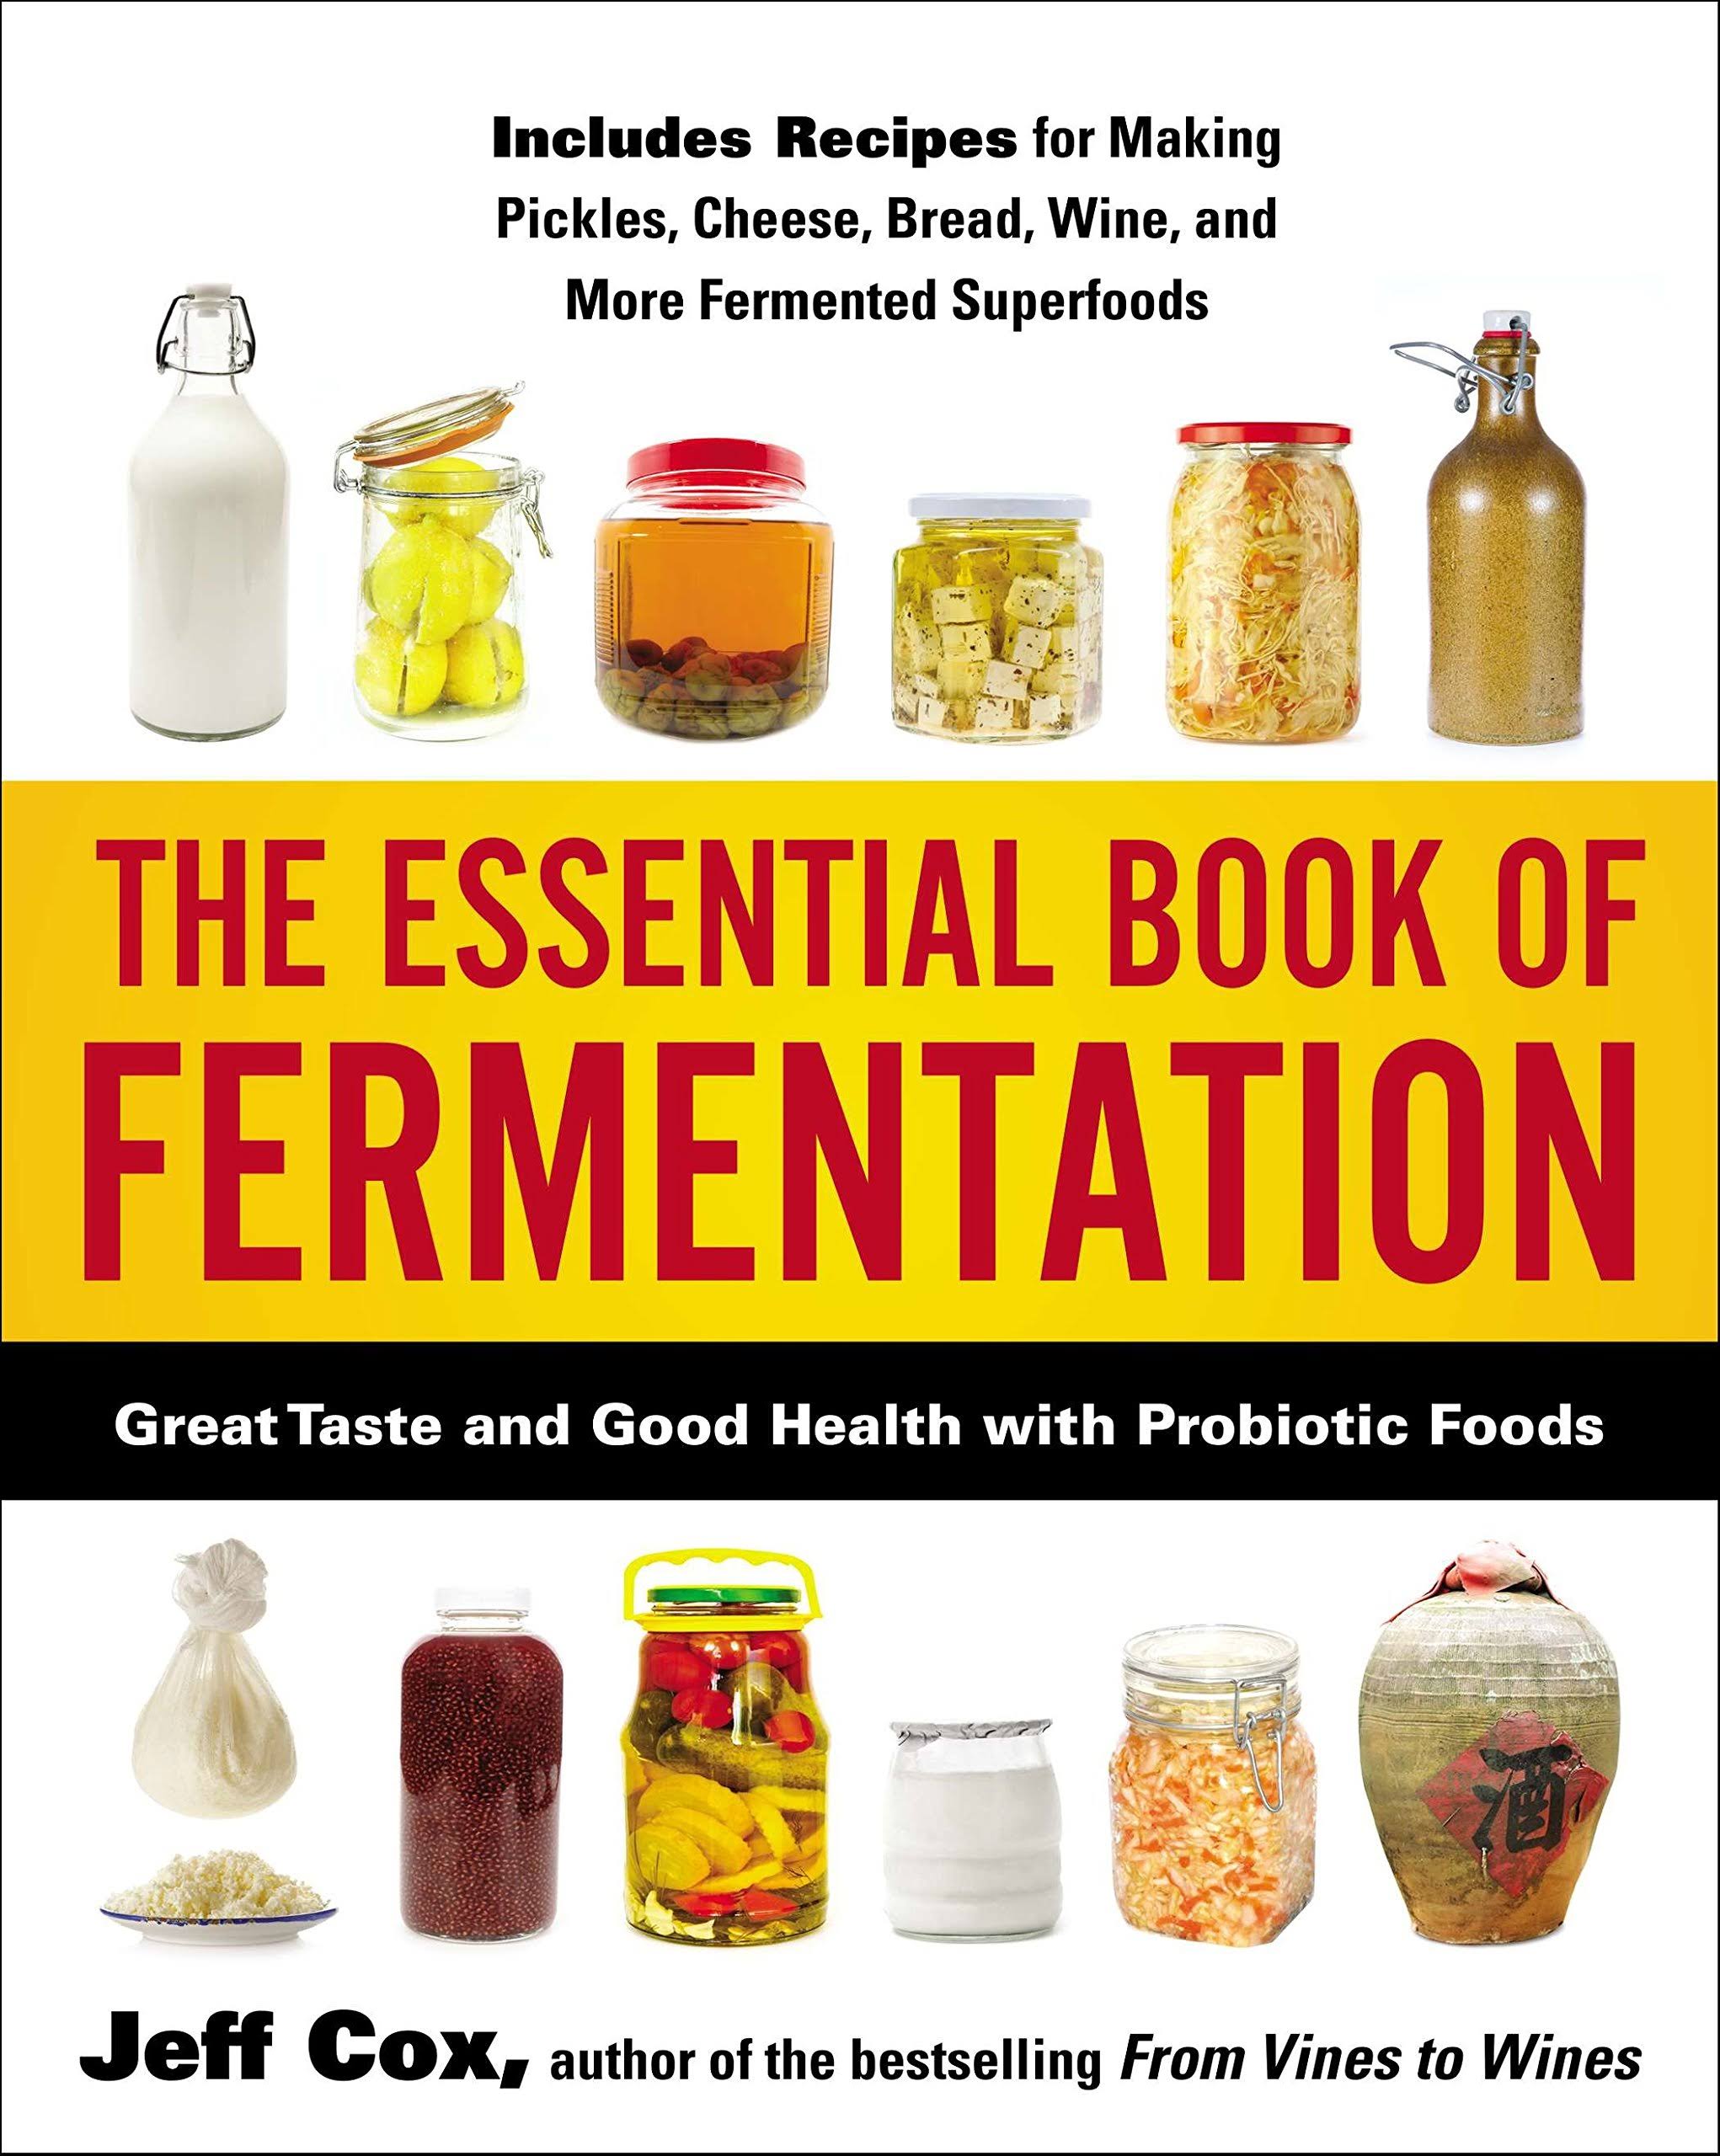 The Essential Book of Fermentation: Great Taste and Good Health with Probiotic Foods [Book]